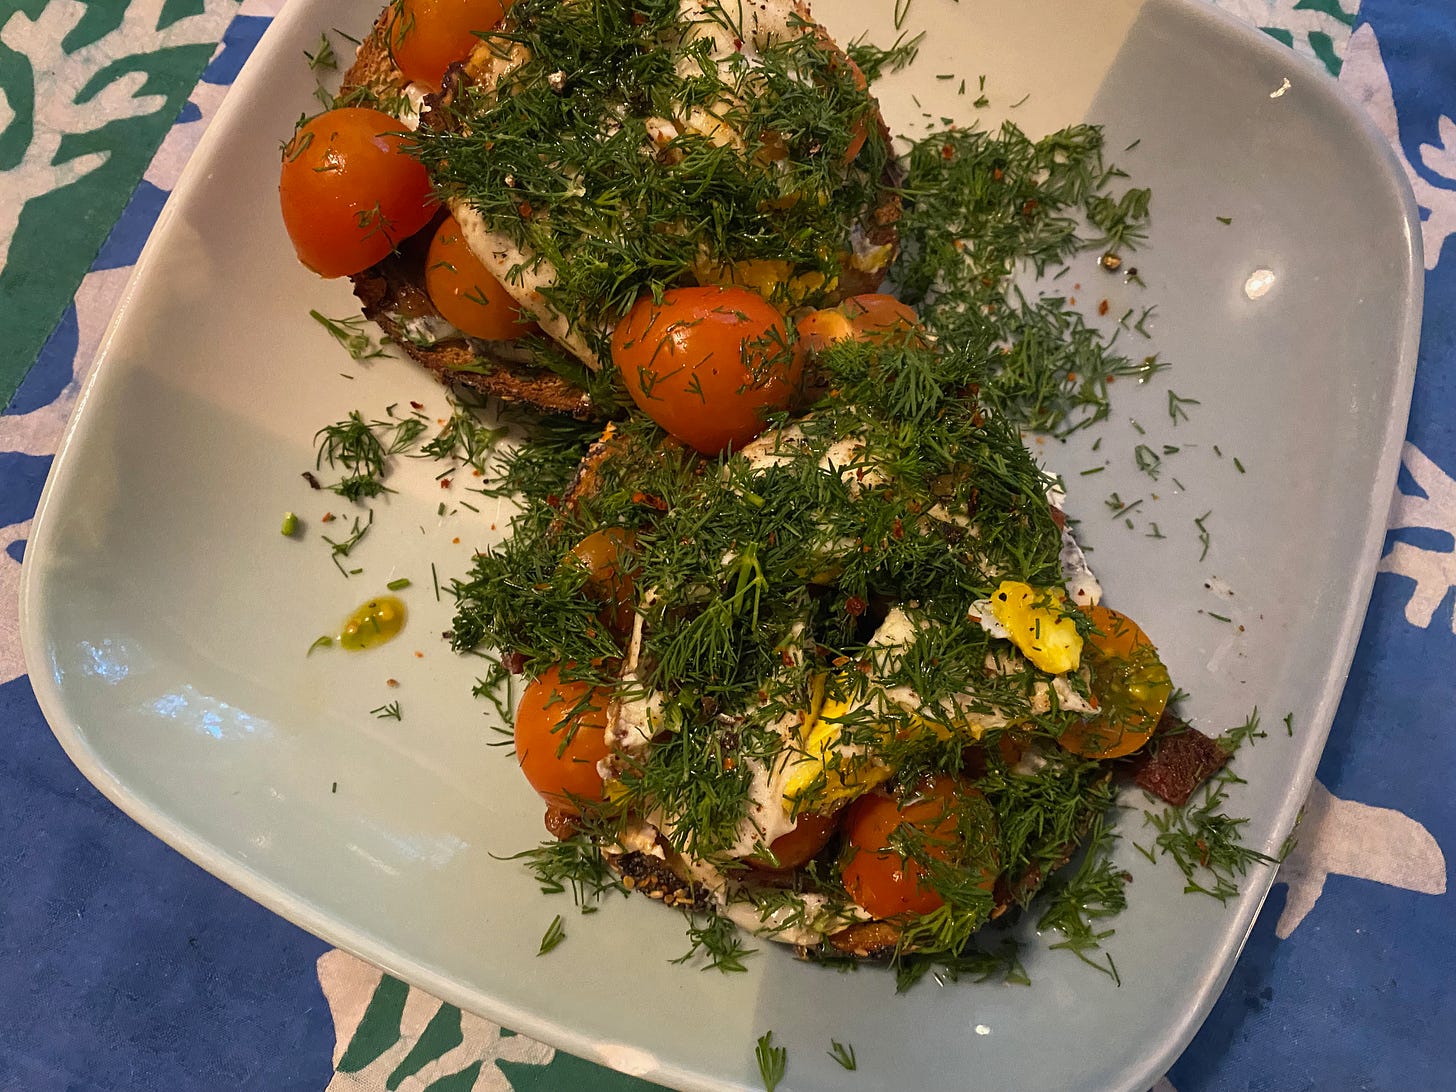 Two toasted bagel halves on a square ceramic plate. The bagels are piled with halved orange cherry tomatoes, a fried egg, and lots of chopped fresh dill.